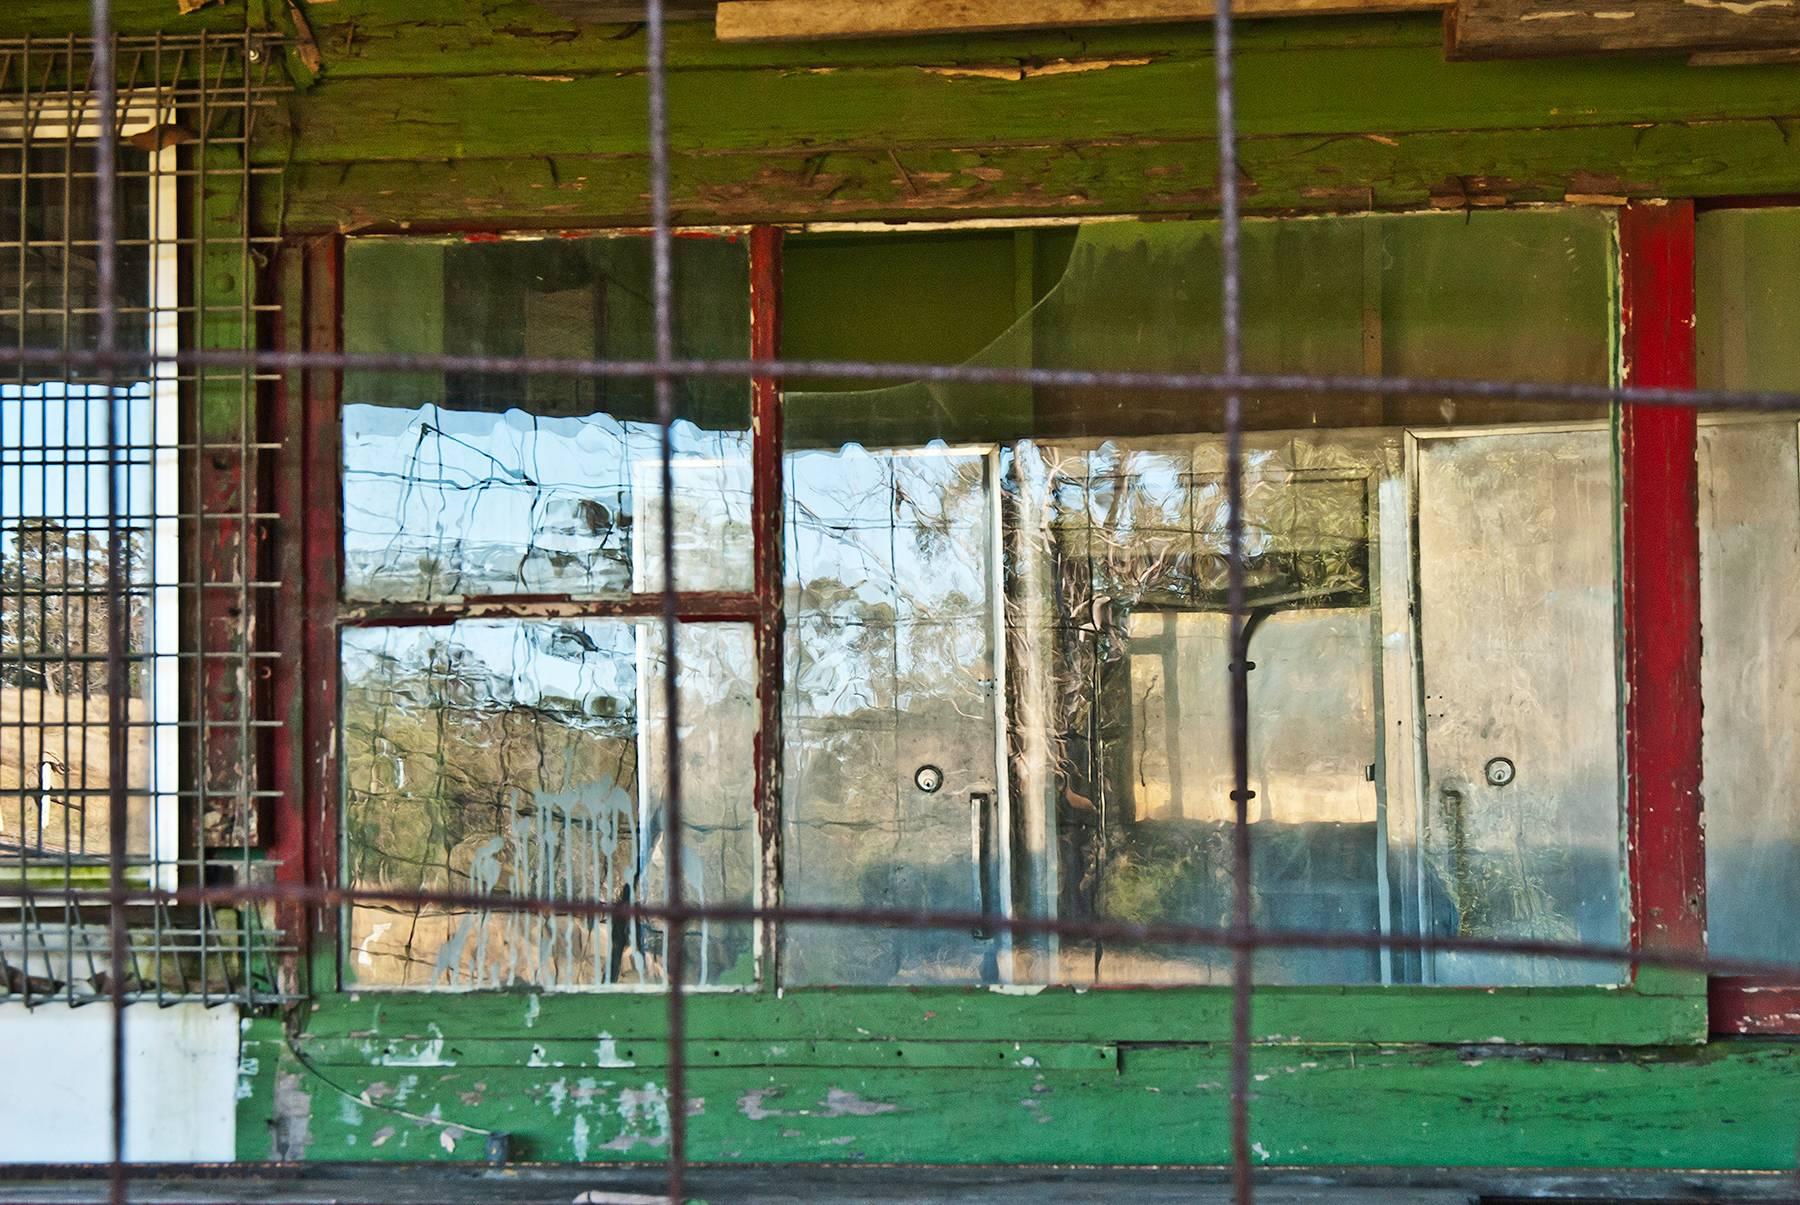 Marie Craig Color Photograph - "Restructure (New South Wales)", contemporary, window, red, green, photograph